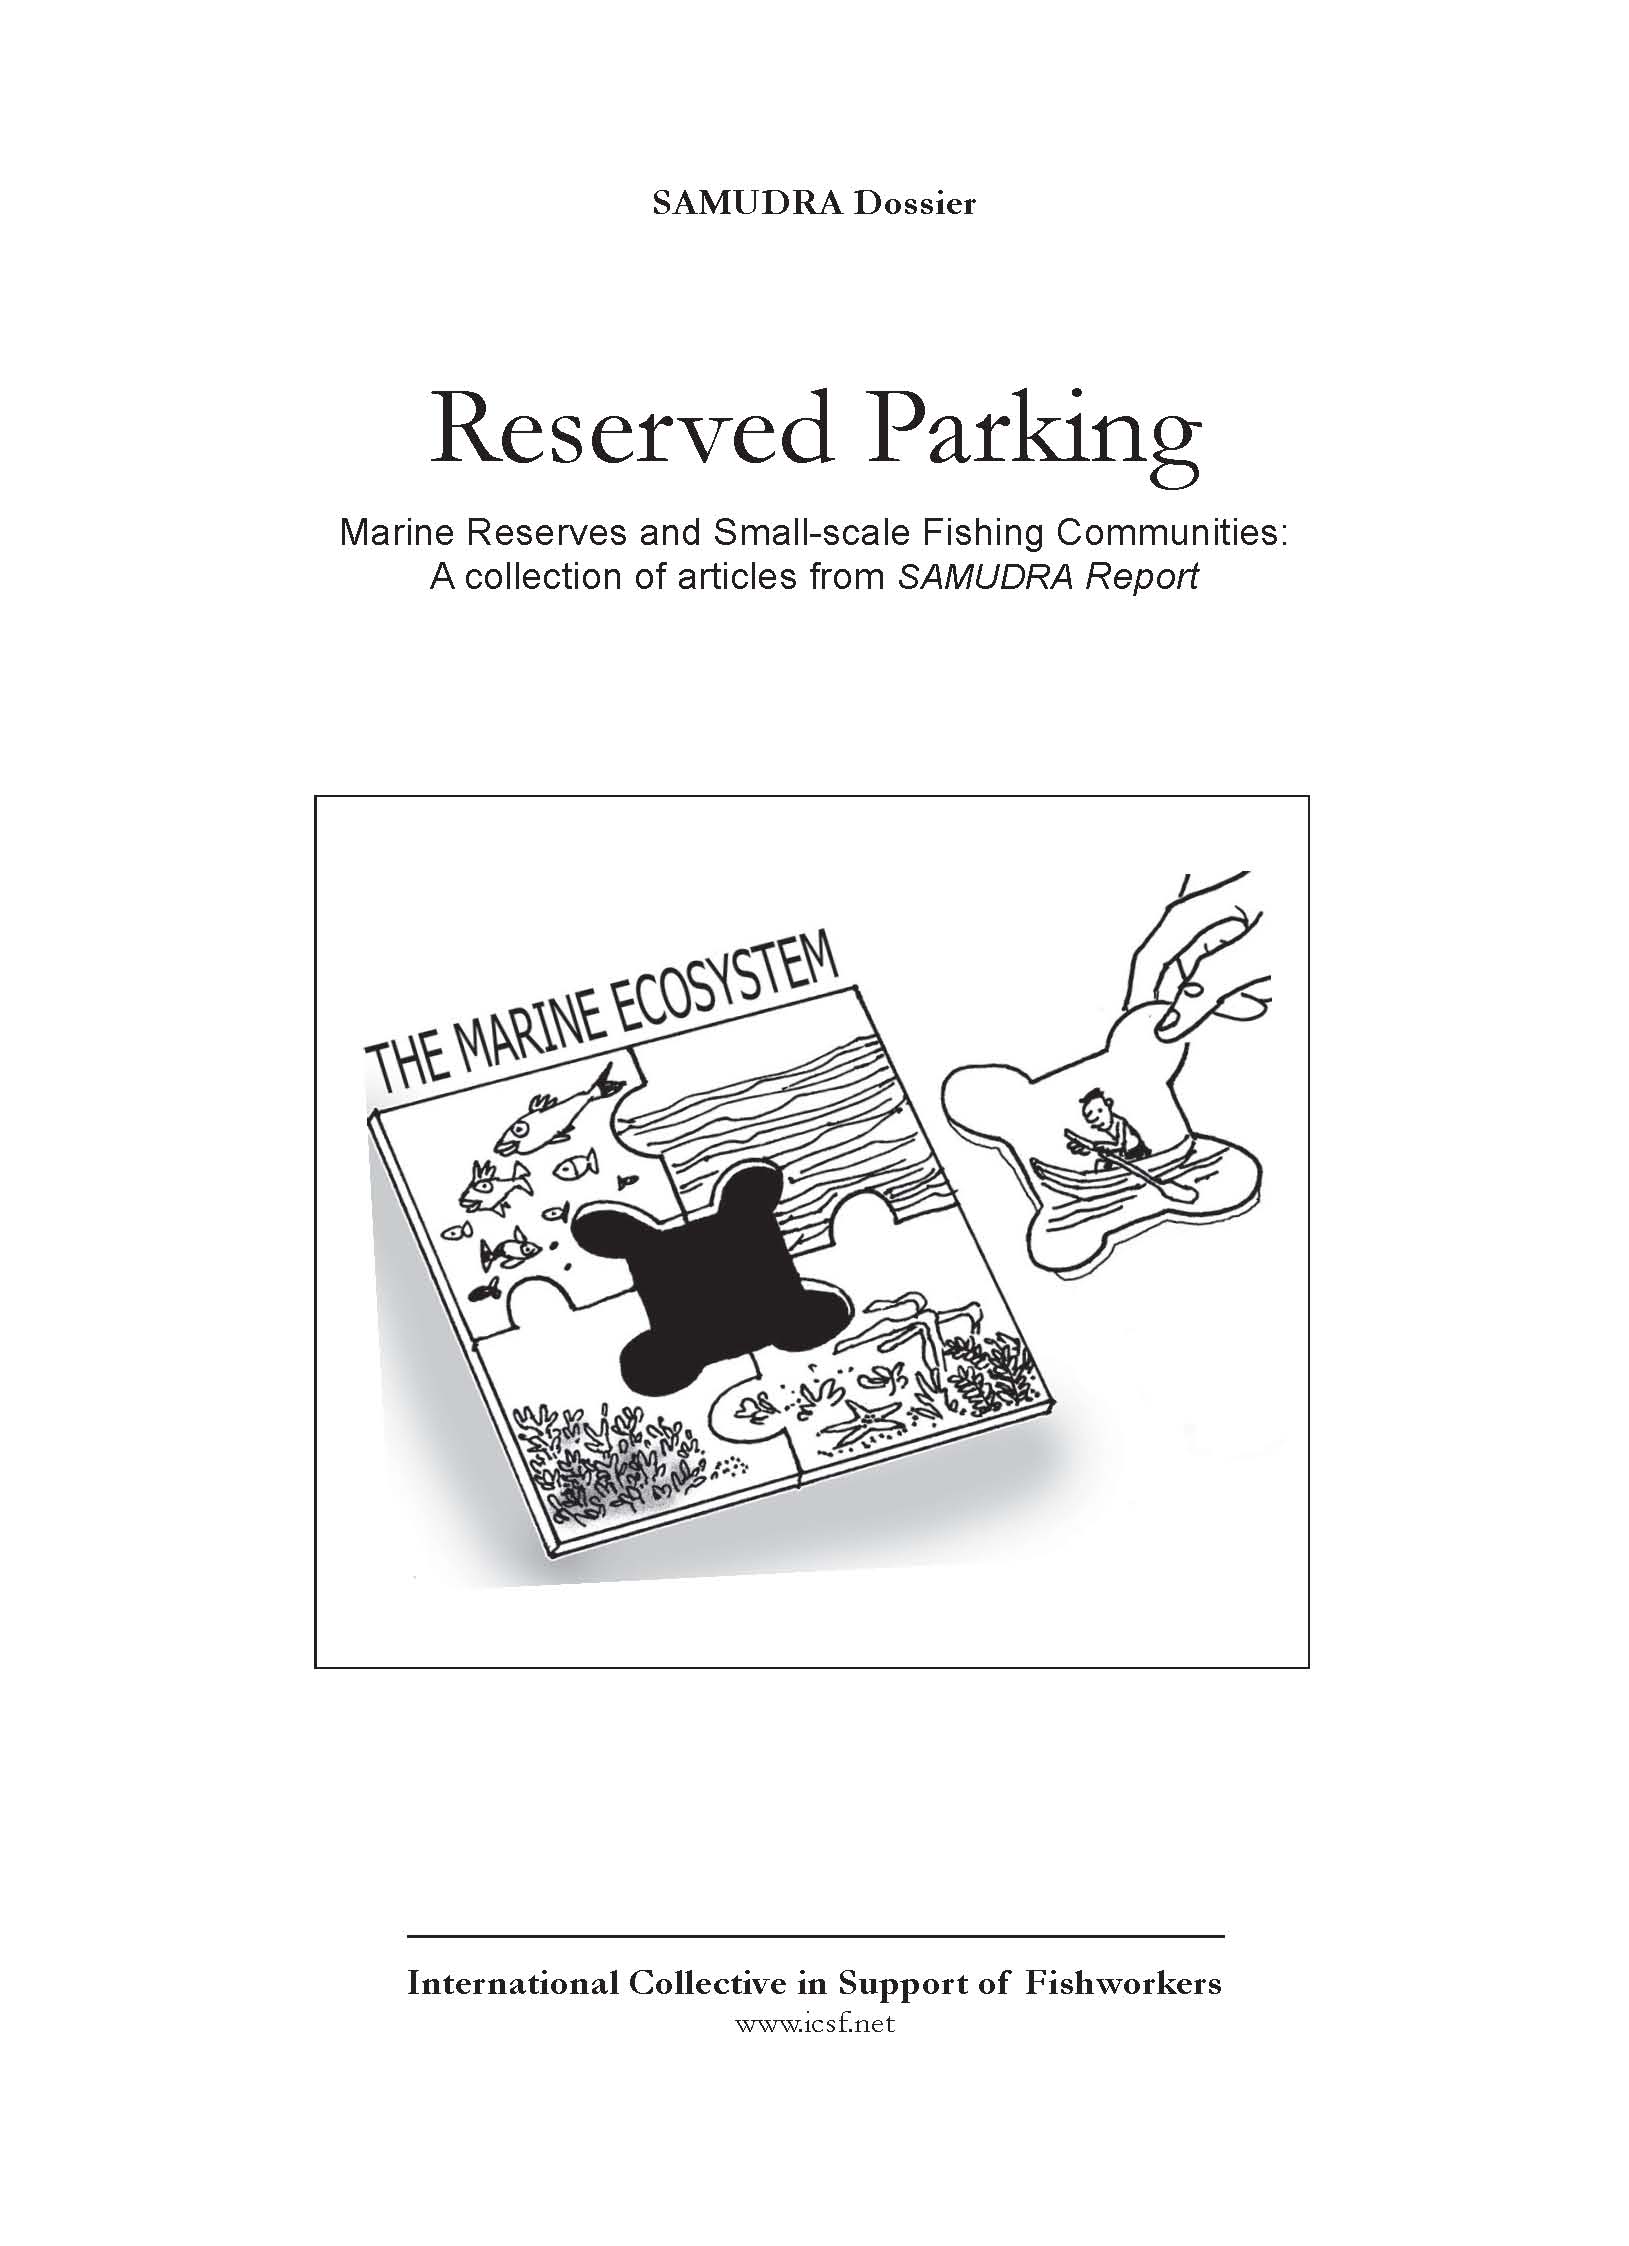 Reserved Parking: Marine Reserves and Small-scale Fishing Communities: A collection of articles from Samudra Report